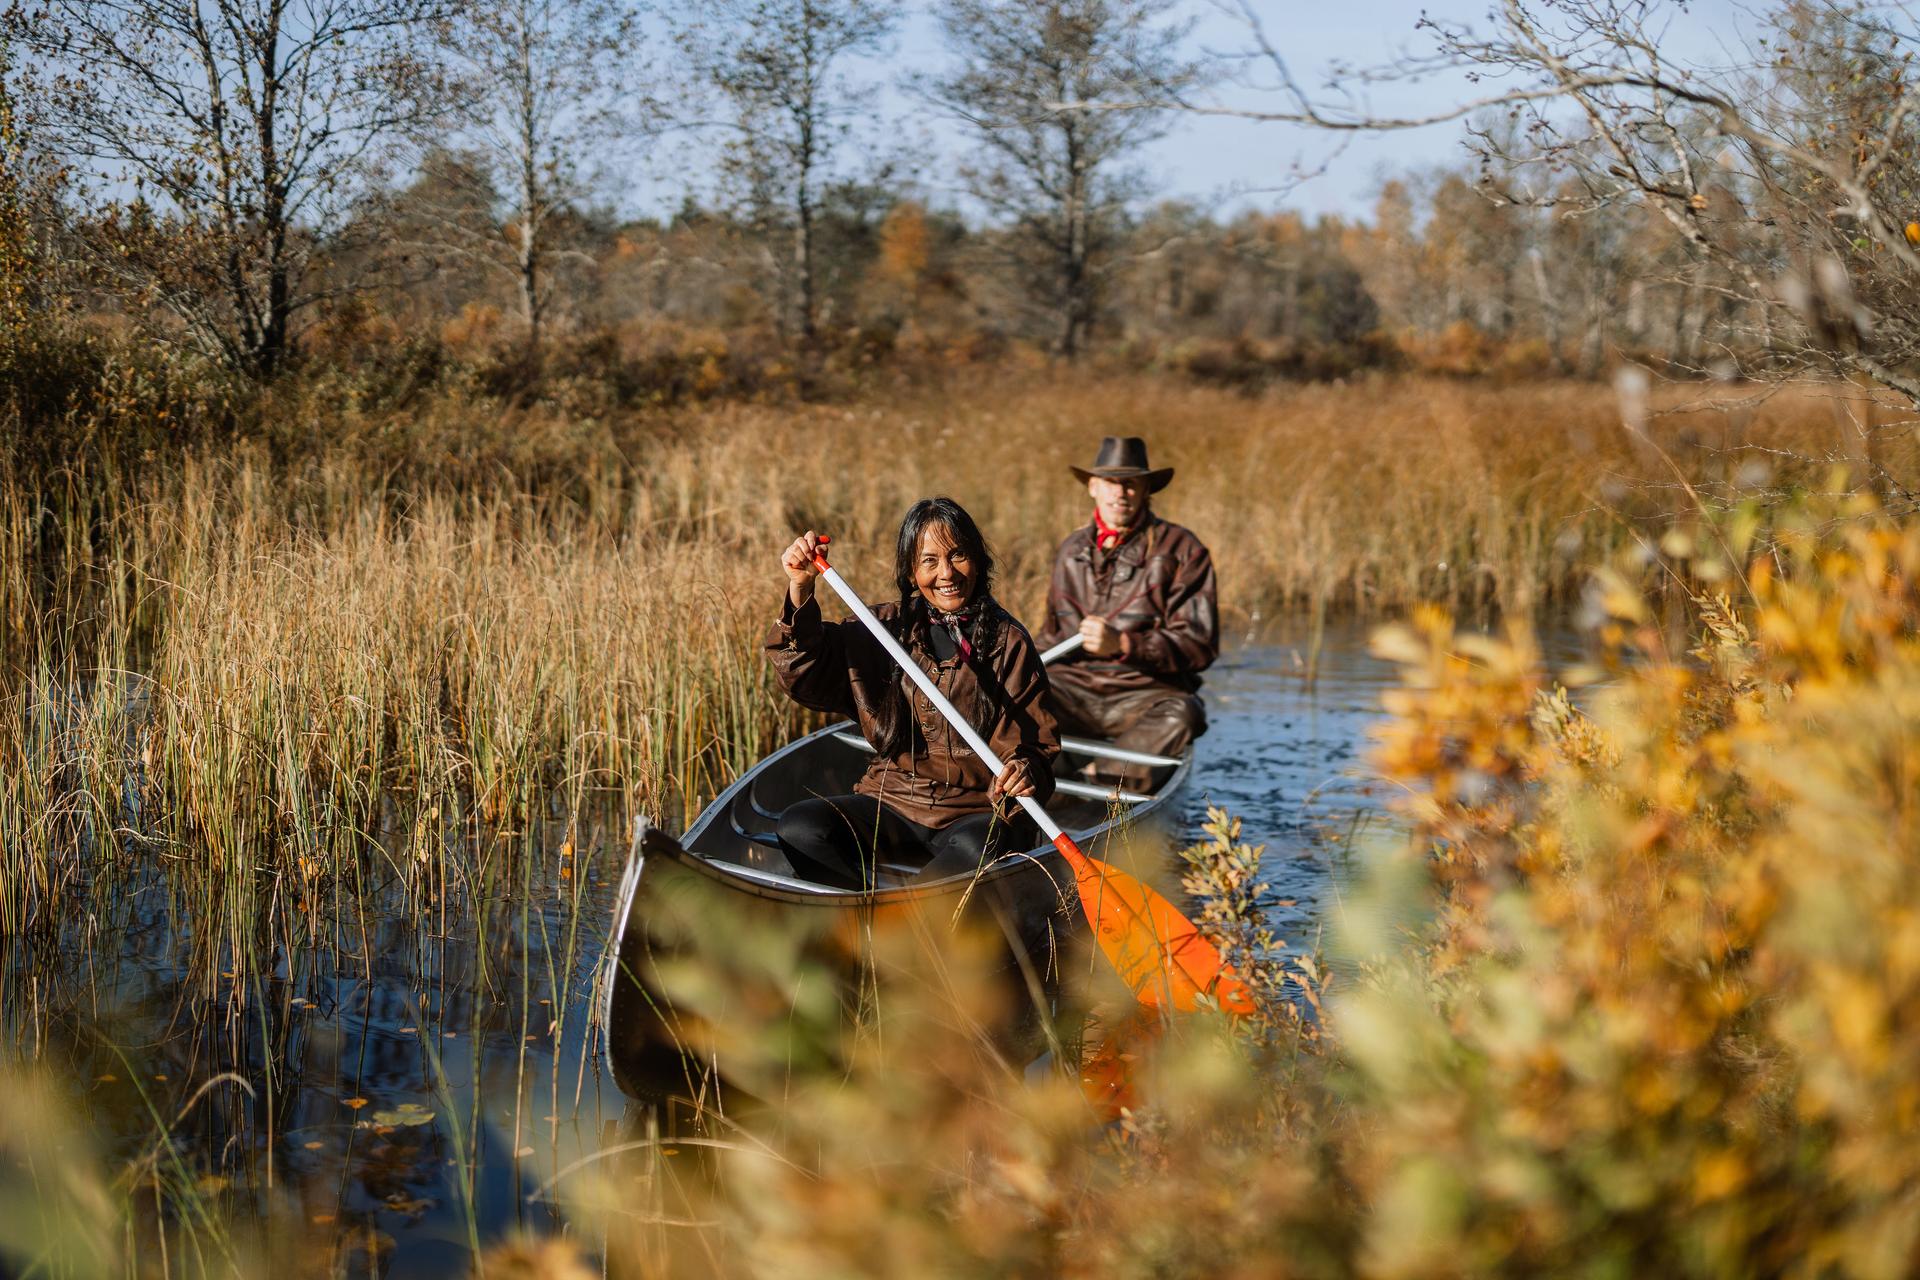 South American lady with braids and a man with a cowboy hat canoeing in a narrow river surrounded by grass and nature.